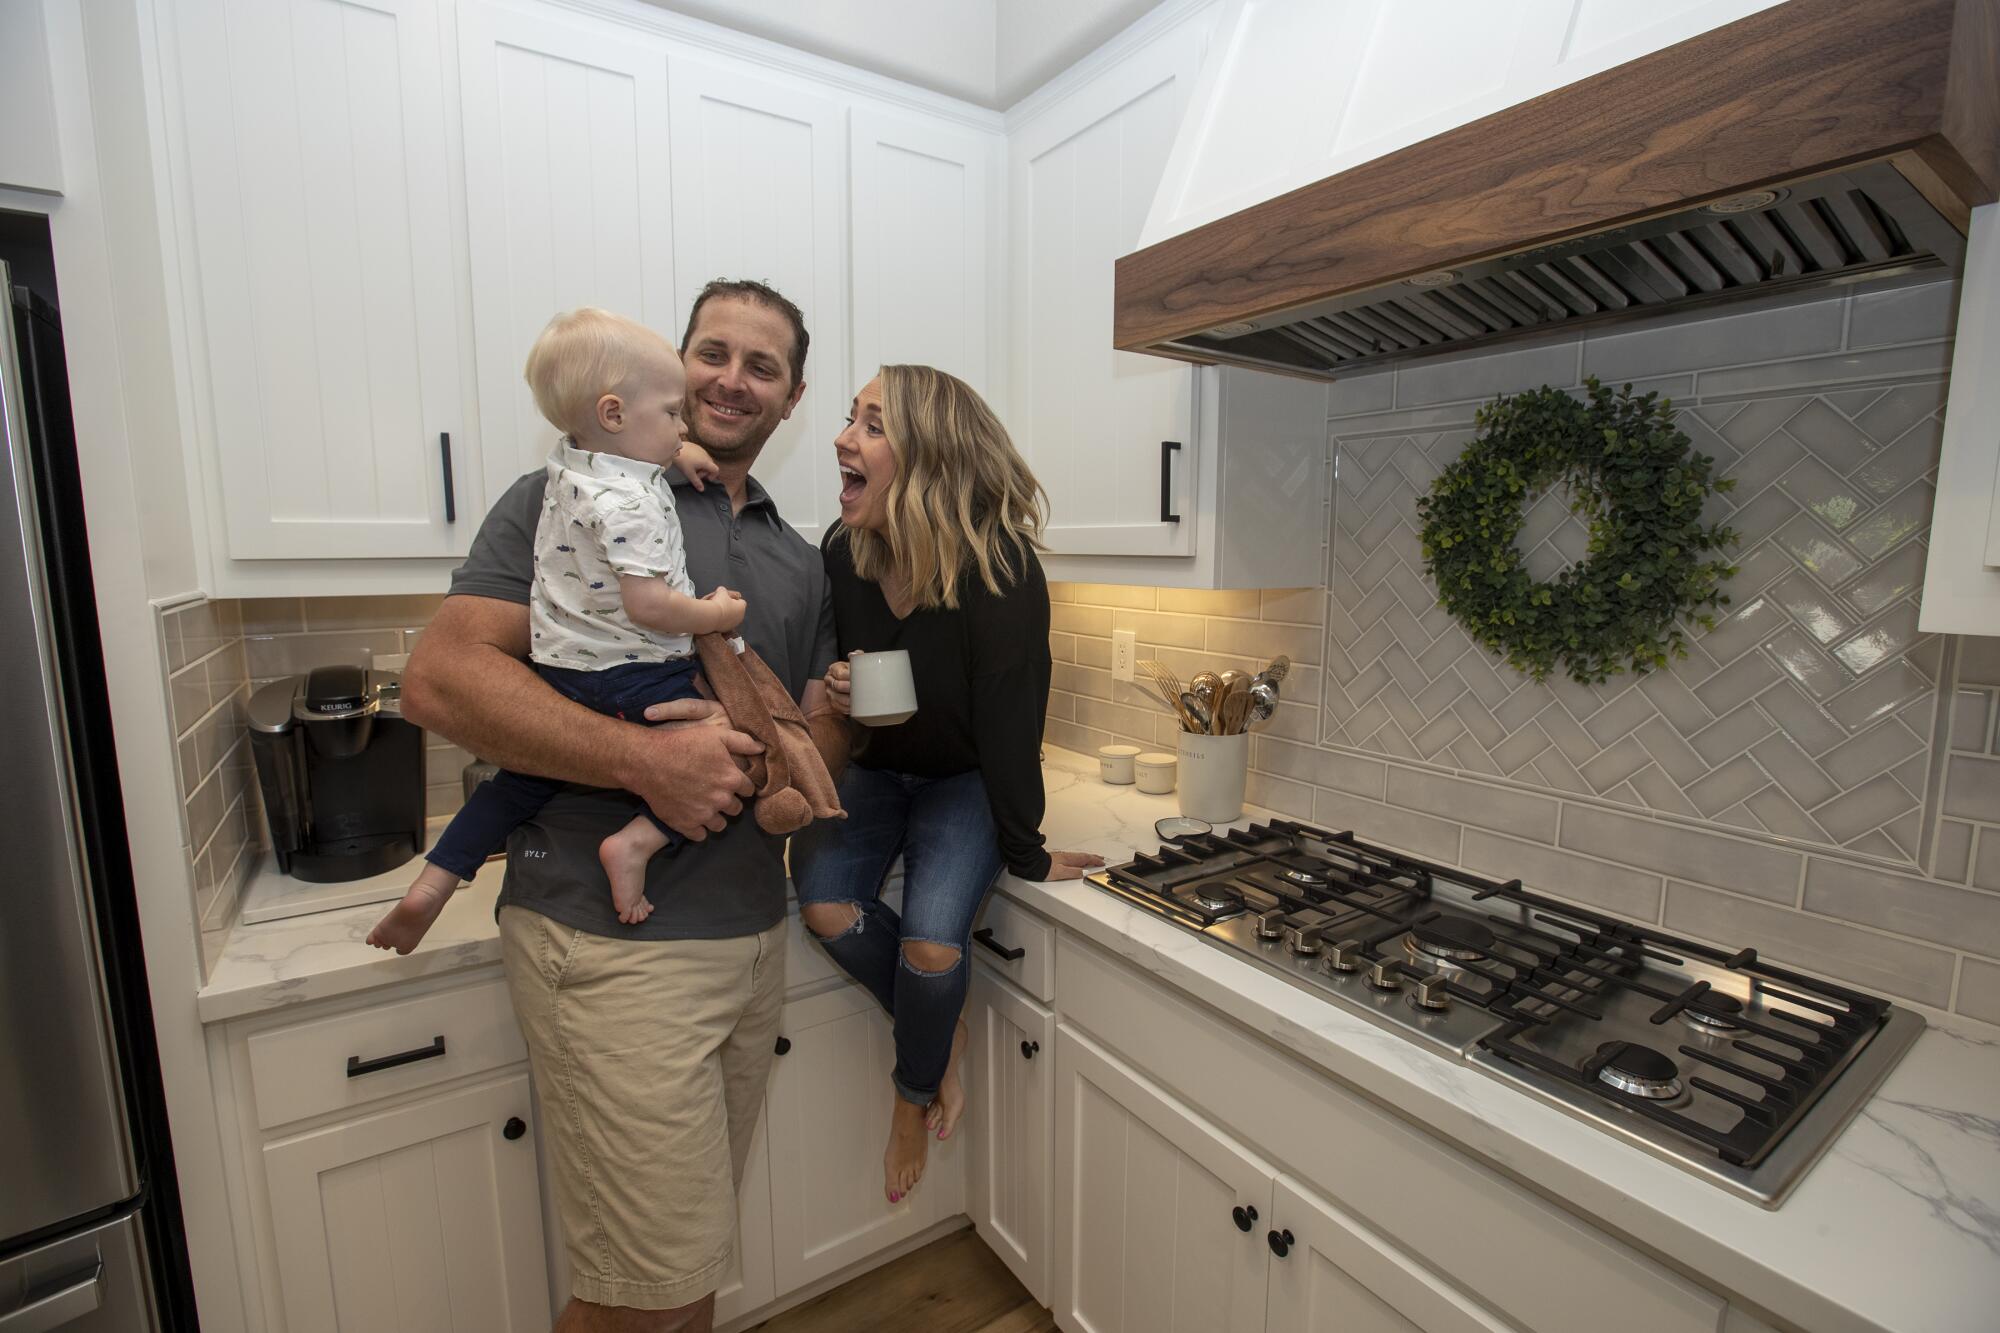 Brian and Rebecca Luke their with son Bennett, 1, in the kitchen of their new home in El Dorado Hills, Calif.